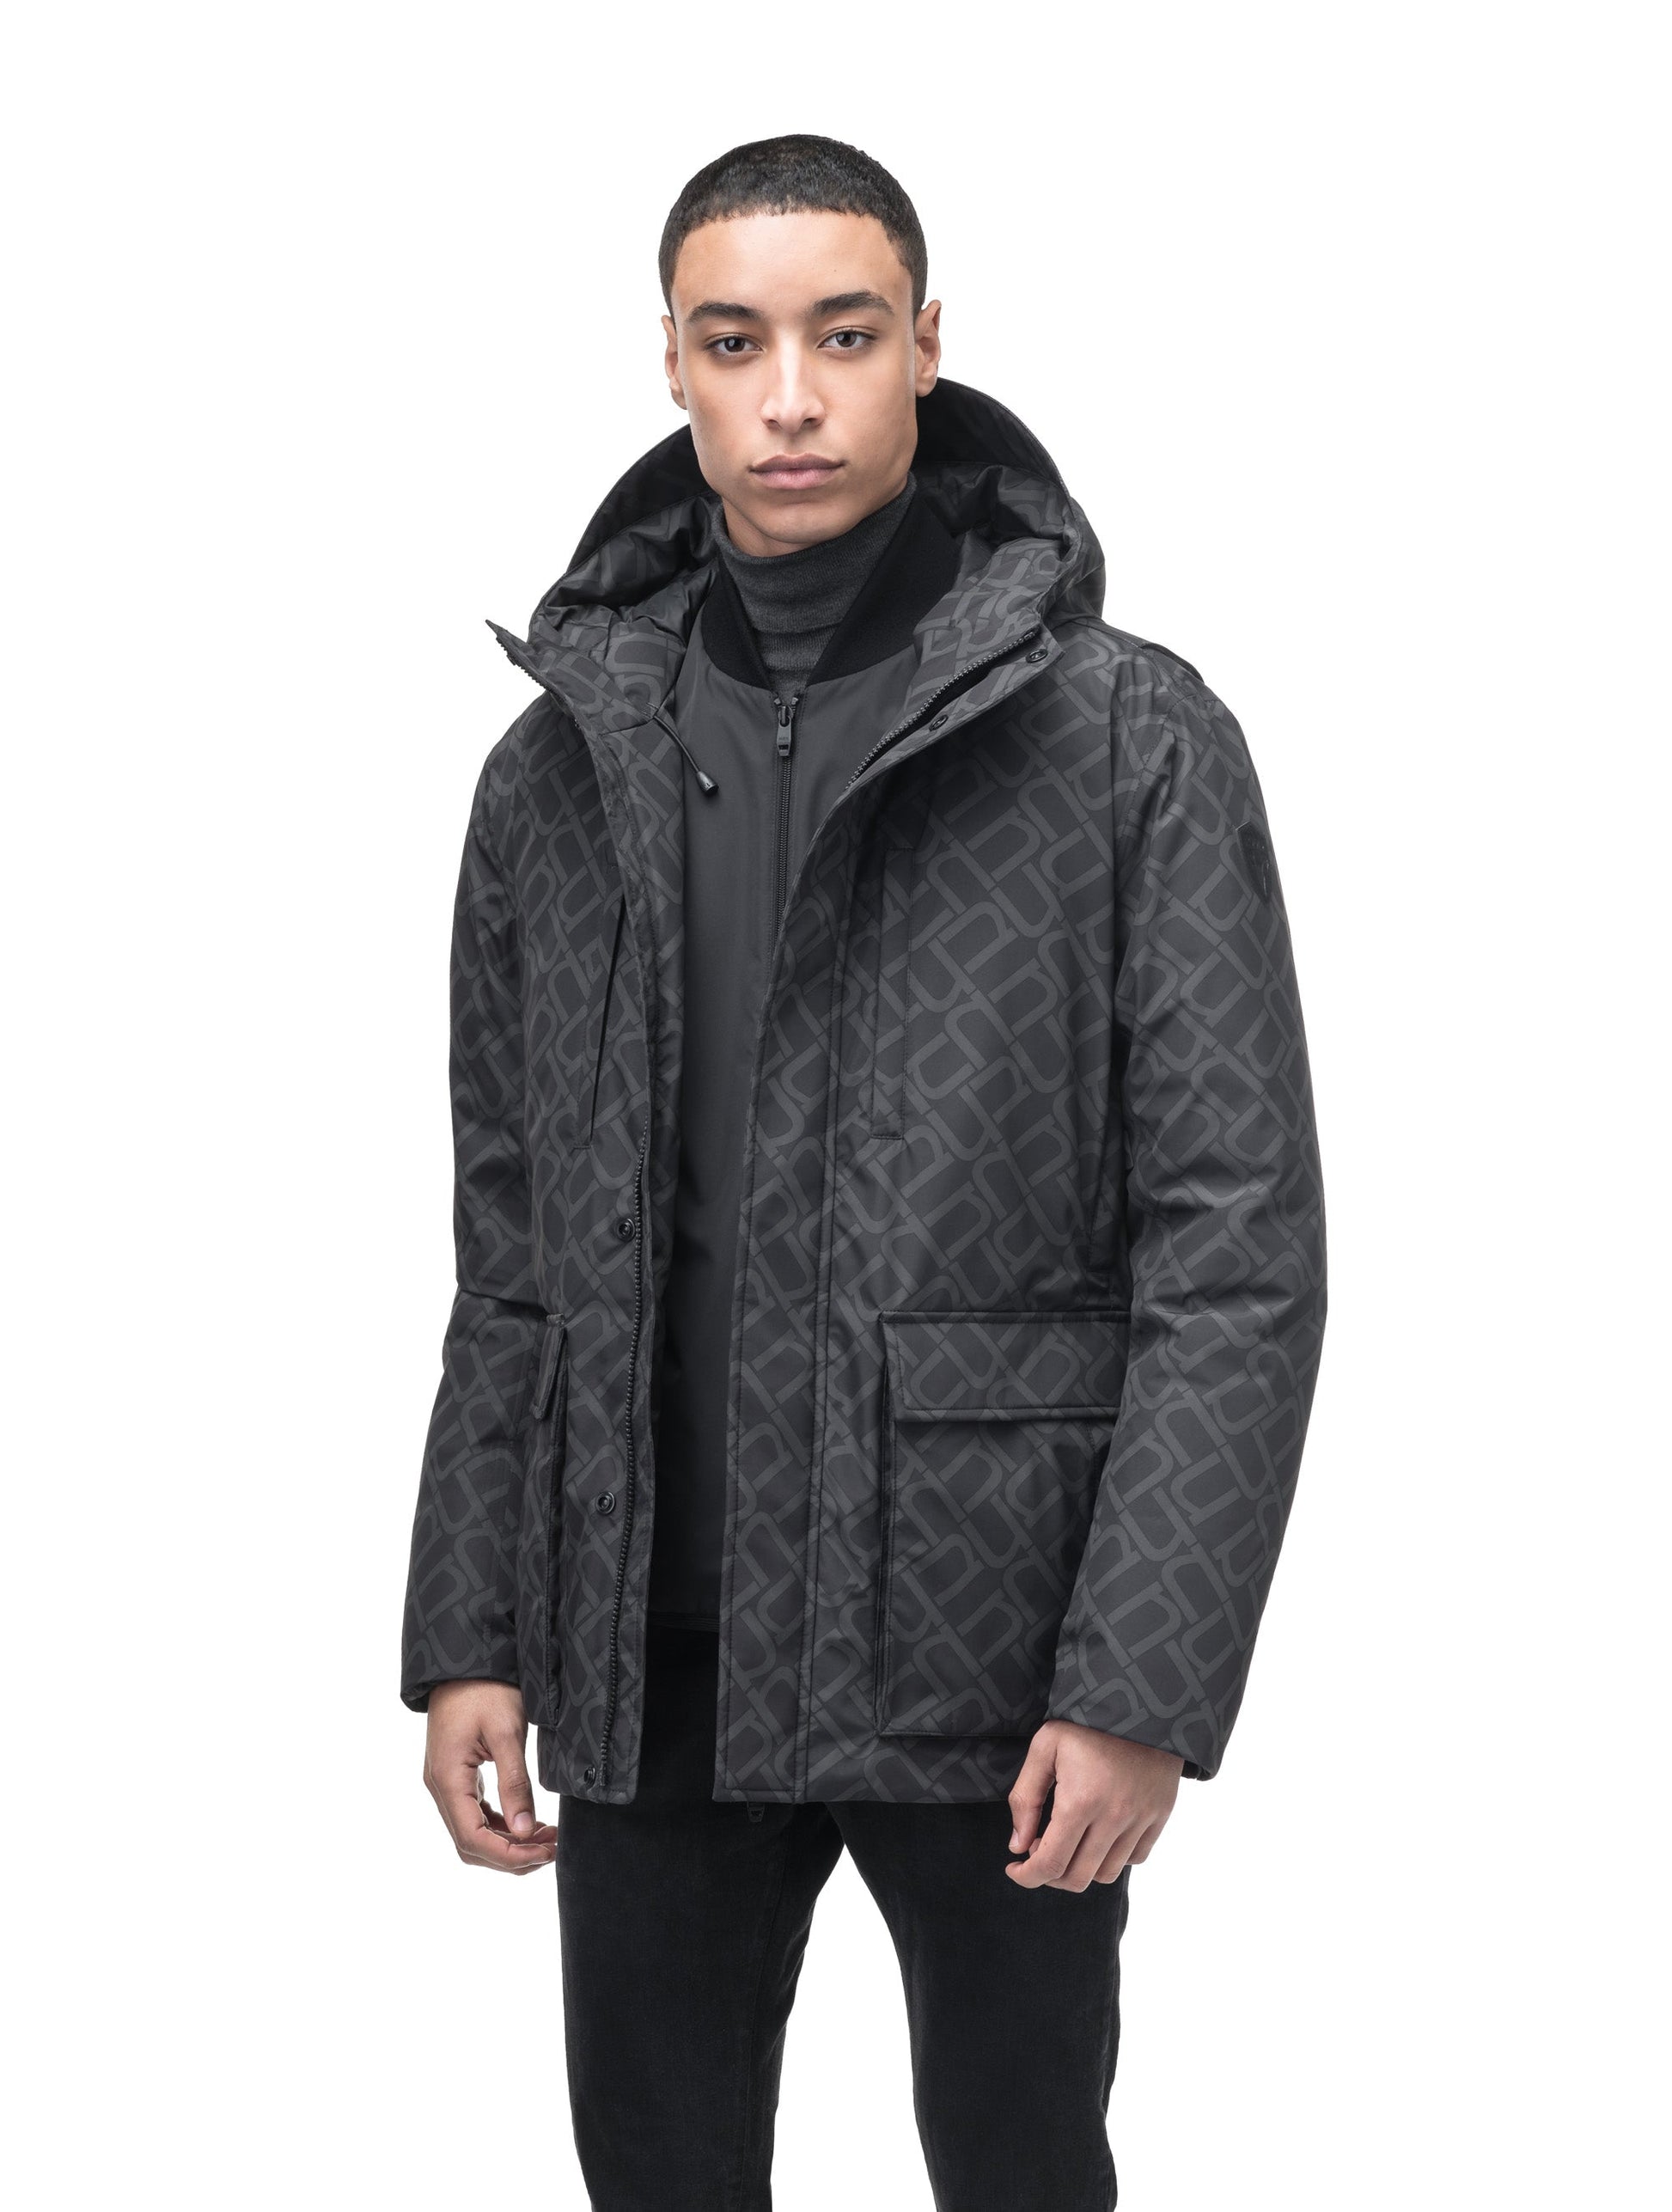 Geo Men's Short Parka in hip length, Canadian duck down insulation, non-removable hood, and two-way zipper, in Dark Monogram